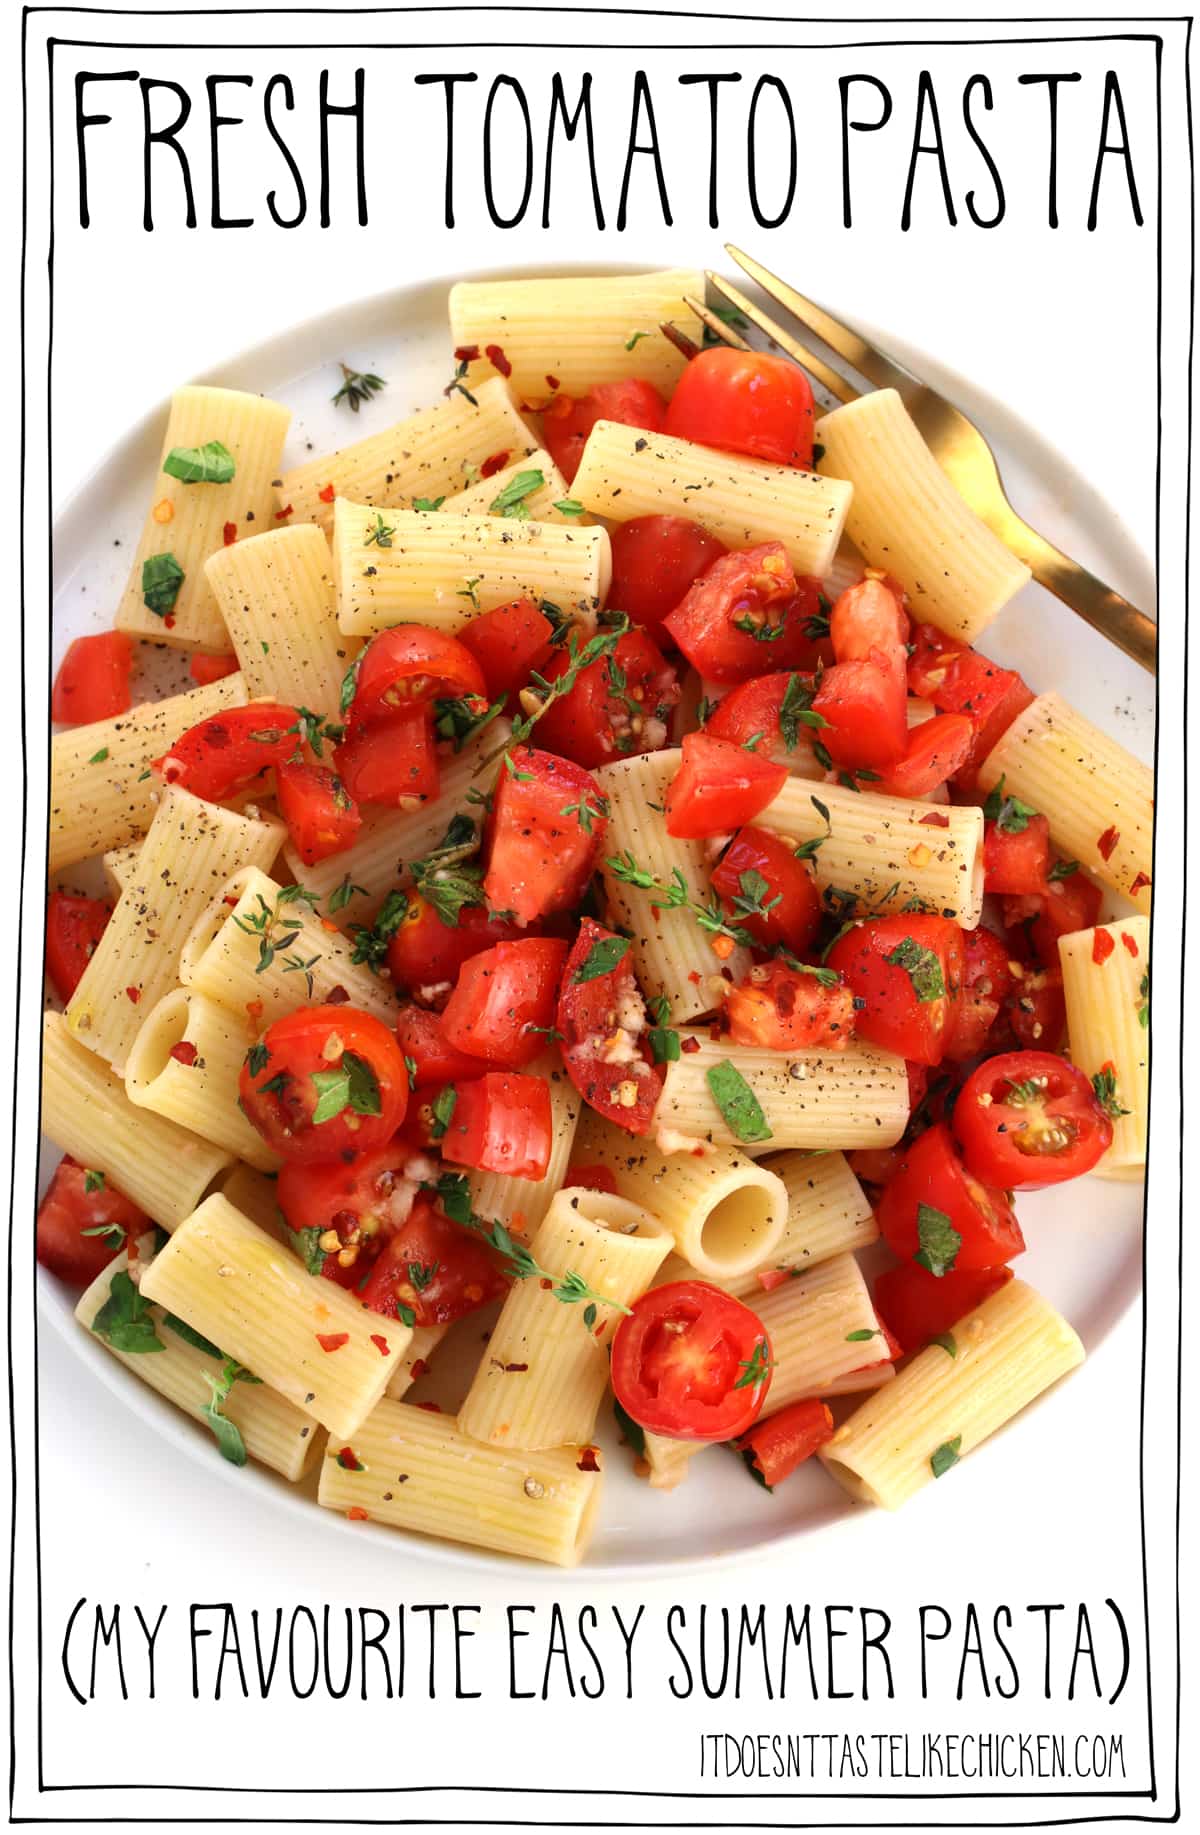 Fresh Tomato Pasta- my favourite summer pasta recipe. Super easy and quick pasta to make. Endless variations, use any kind of pasta, any kind of tomatoes, and any kind of herbs! No matter the combo, it always turns out so delicious. The no-cook sauce couldn't be simpler to make. Just chop, mix, and toss with hot pasta. That's it! #itdoesnttastelikechicken #veganrecipes #pasta